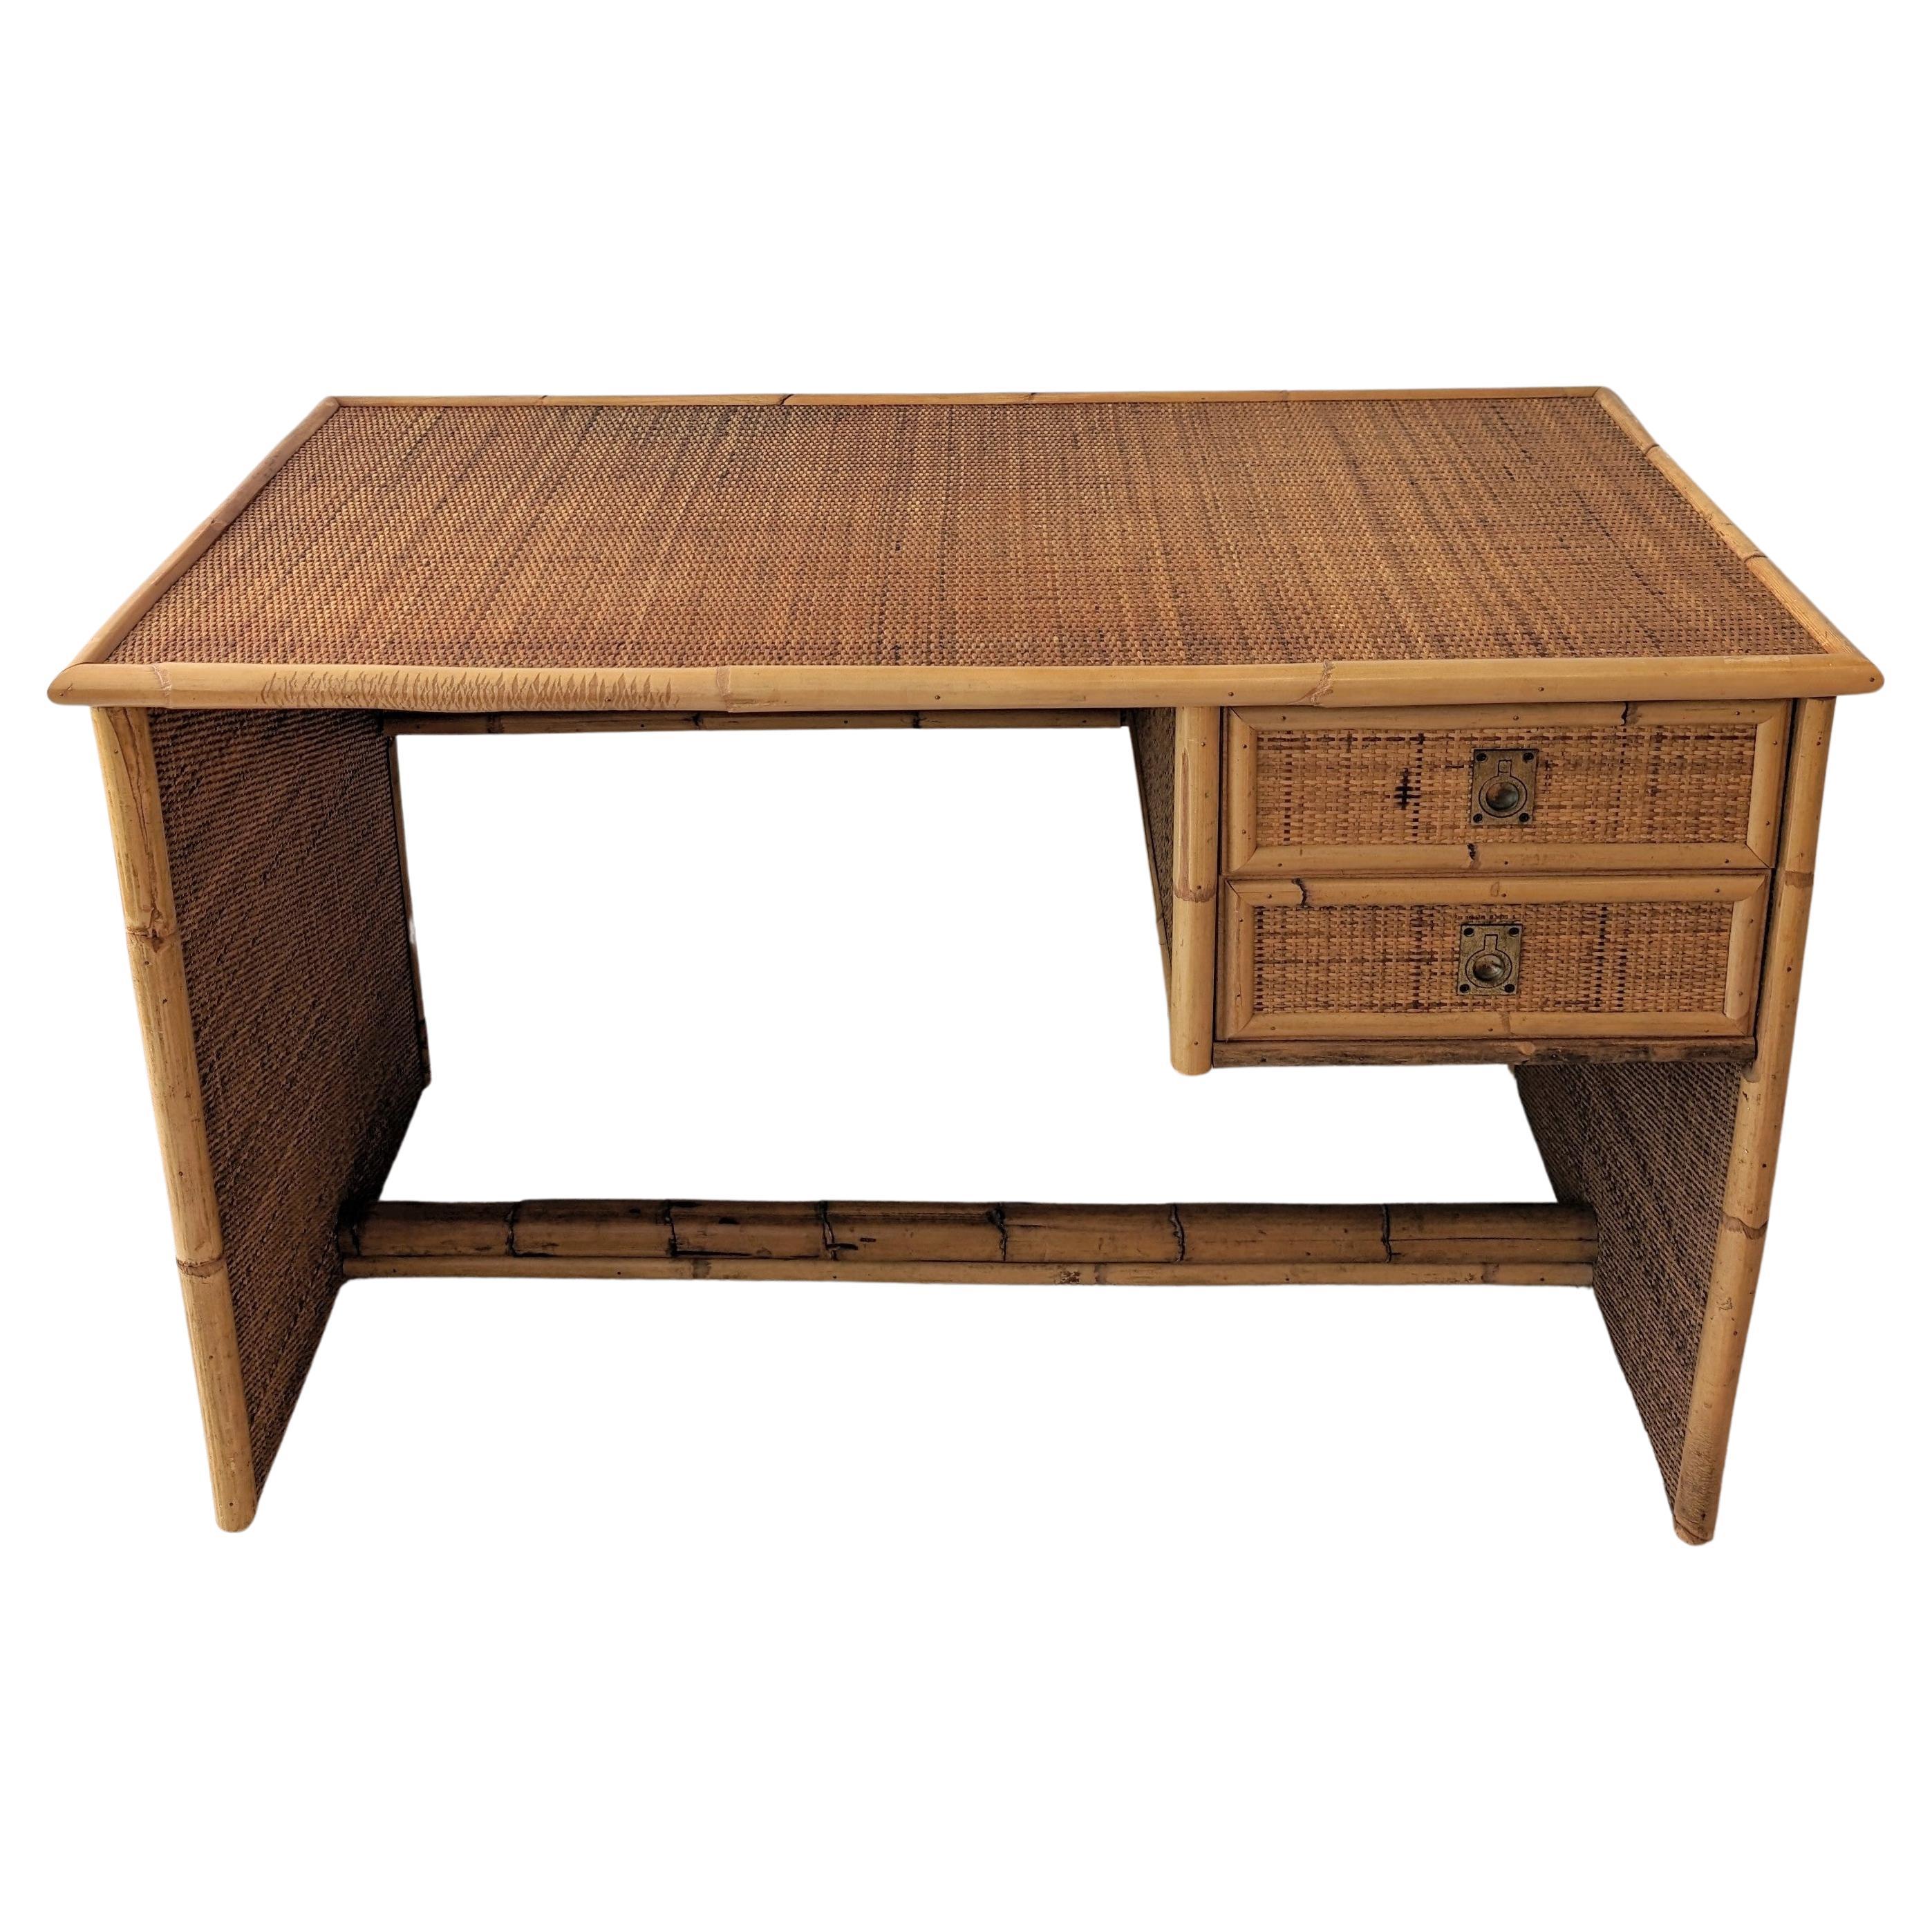 Vintage bamboo and rattan desk / dressing table by Dal Vera, Italy 1970s